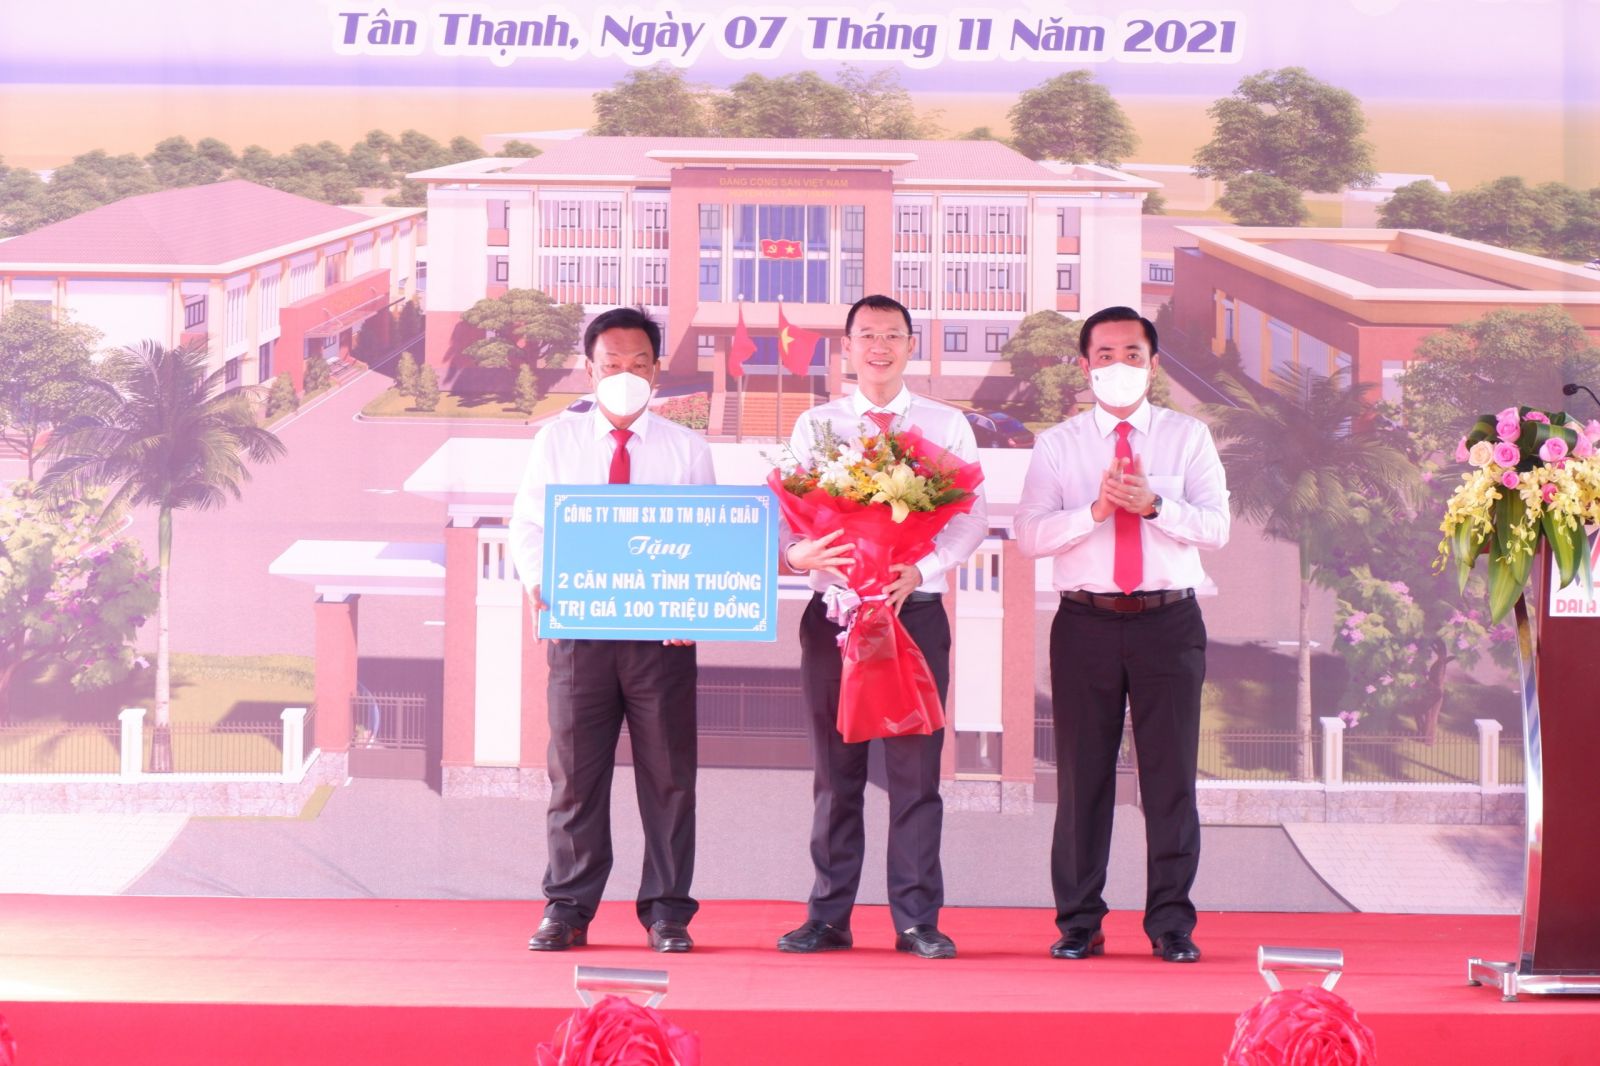 Chairman of Tan Thanh District People's Committee - Le Thanh Dong (R) presents flowers to the representative of Dai A Chau Manufacturing-Building-Trading Co., Ltd. in awarding the amount of 100 million VND to build 2 charity houses 